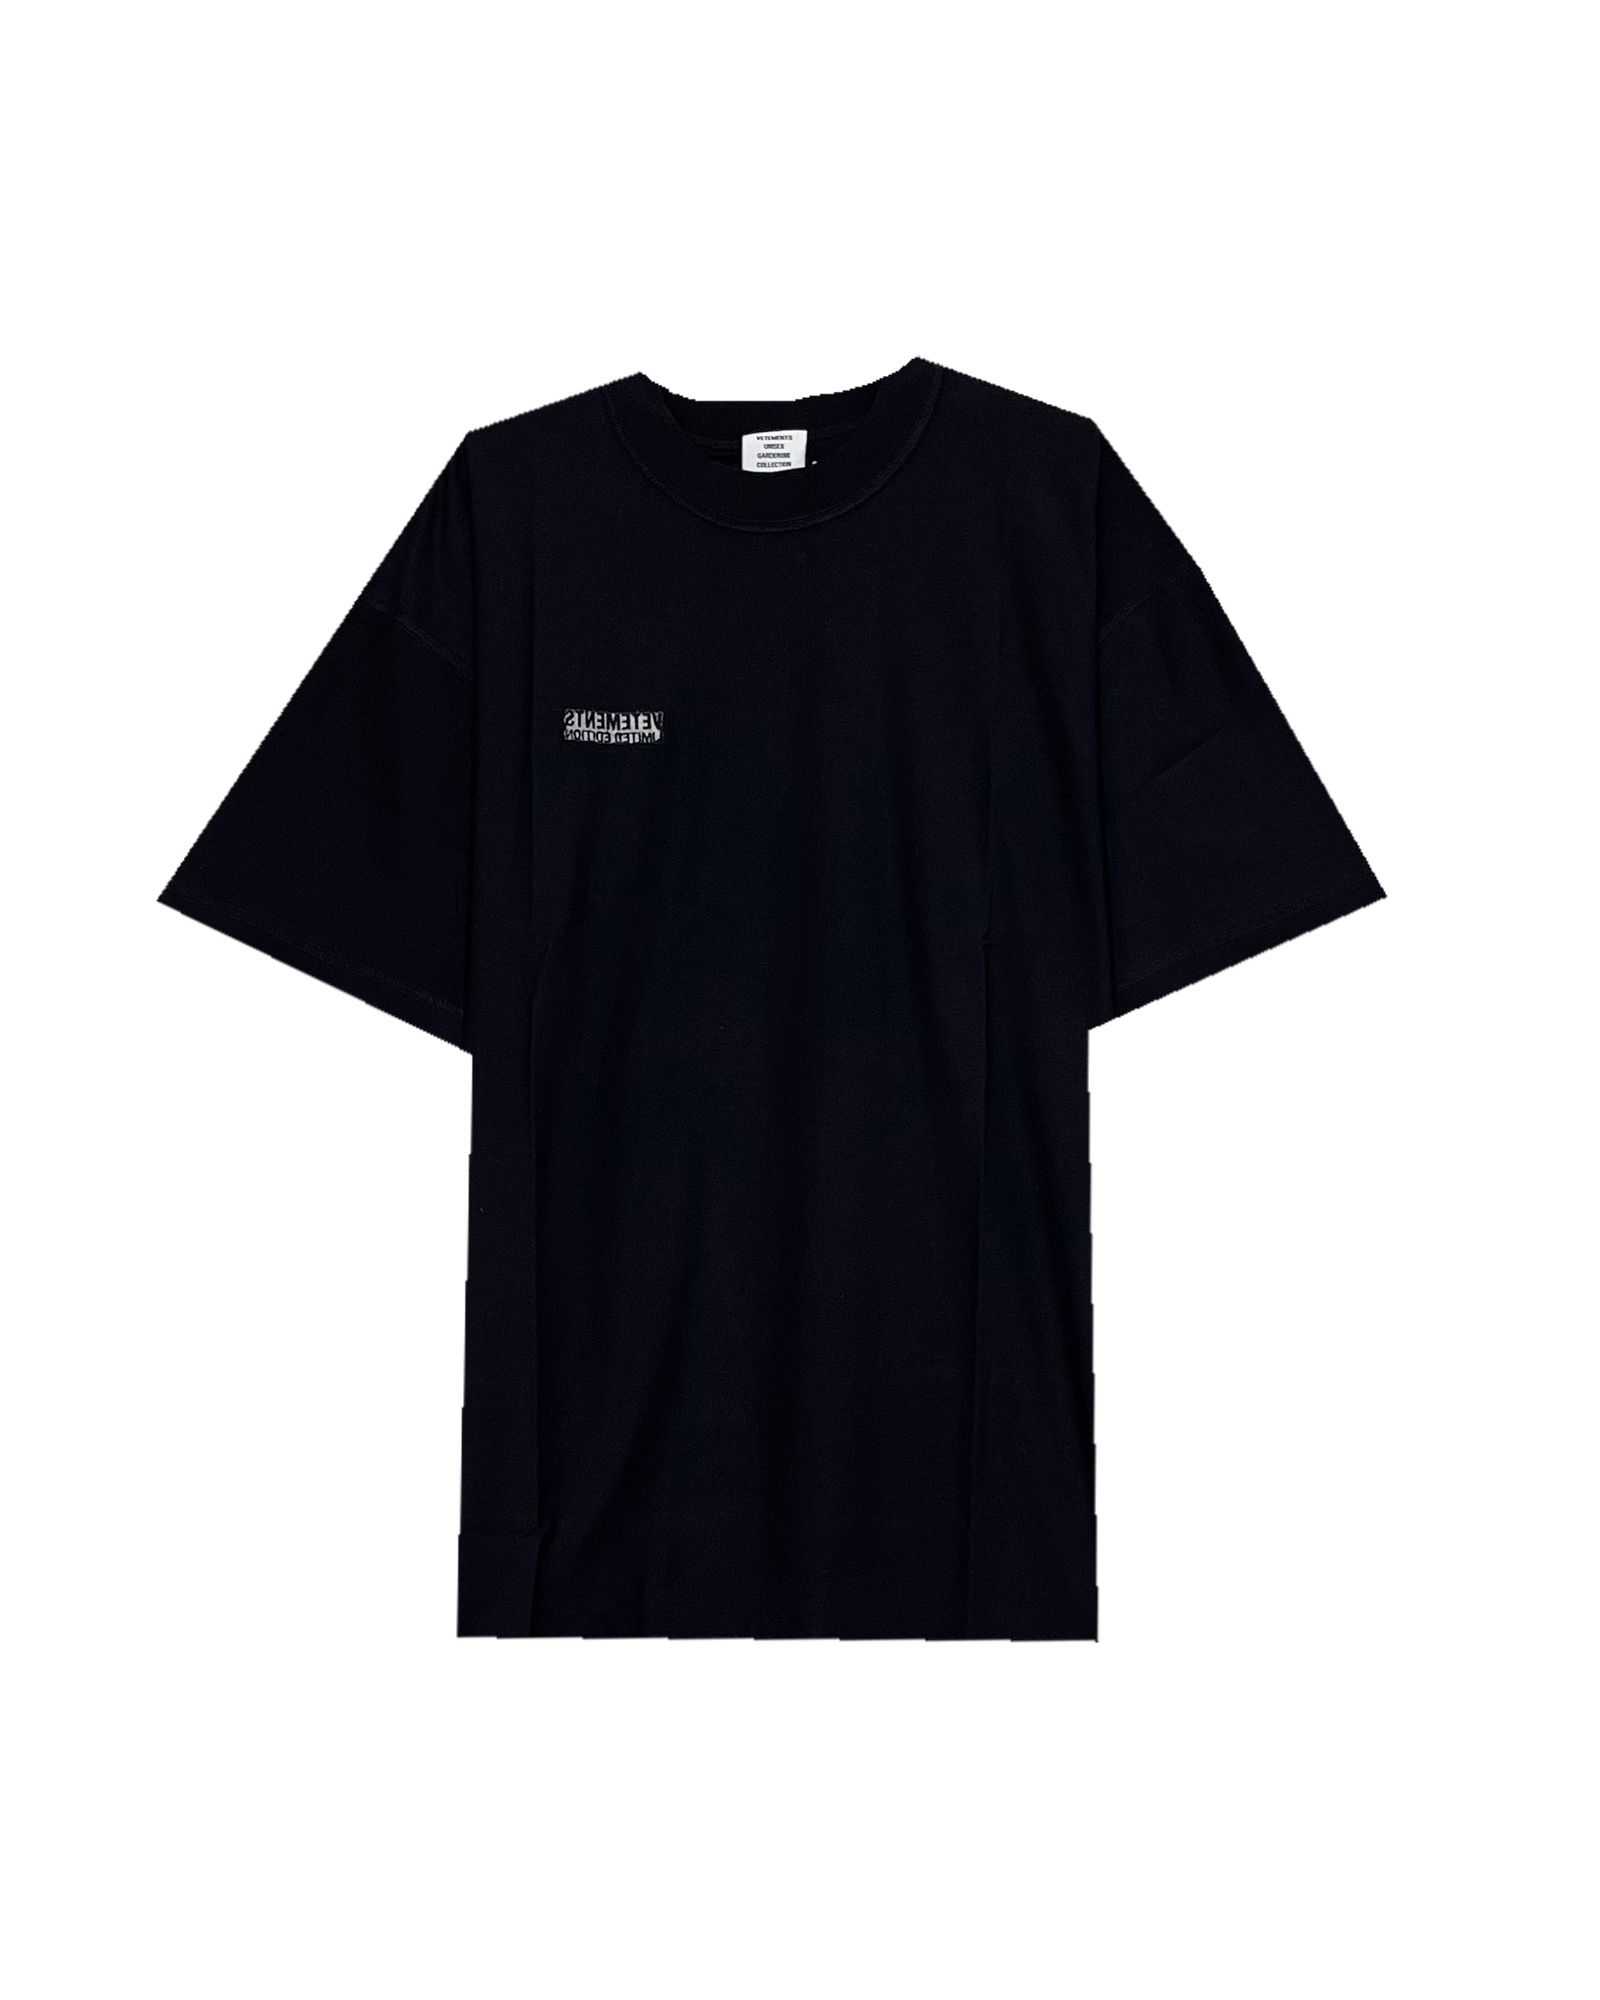 VETEMENTS - ALL BLACK INSIDE-OUT t-shirt | Detail